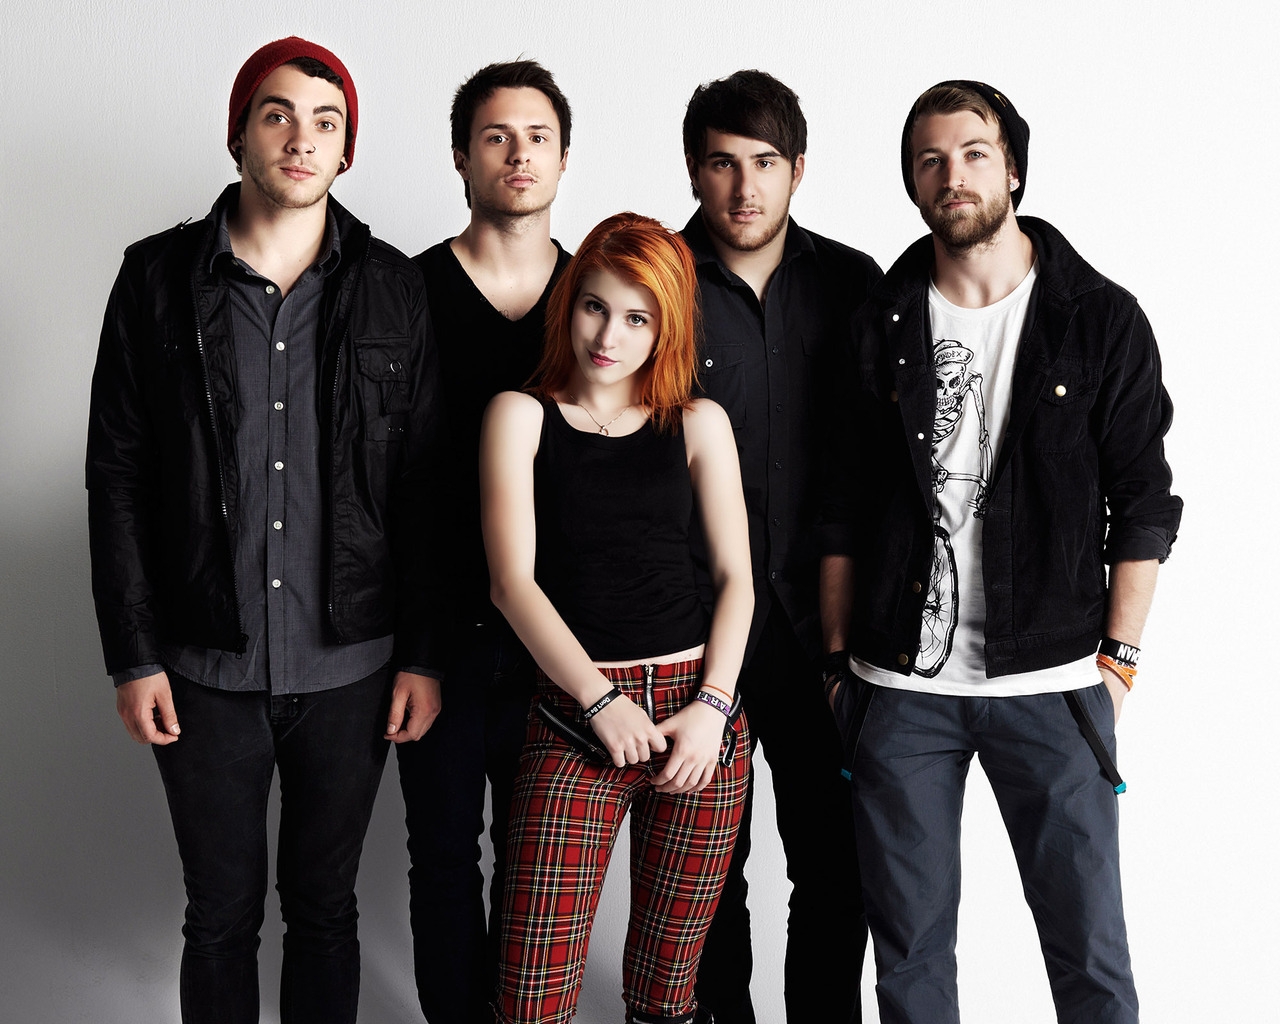 Hayley Williams and Paramore for 1280 x 1024 resolution